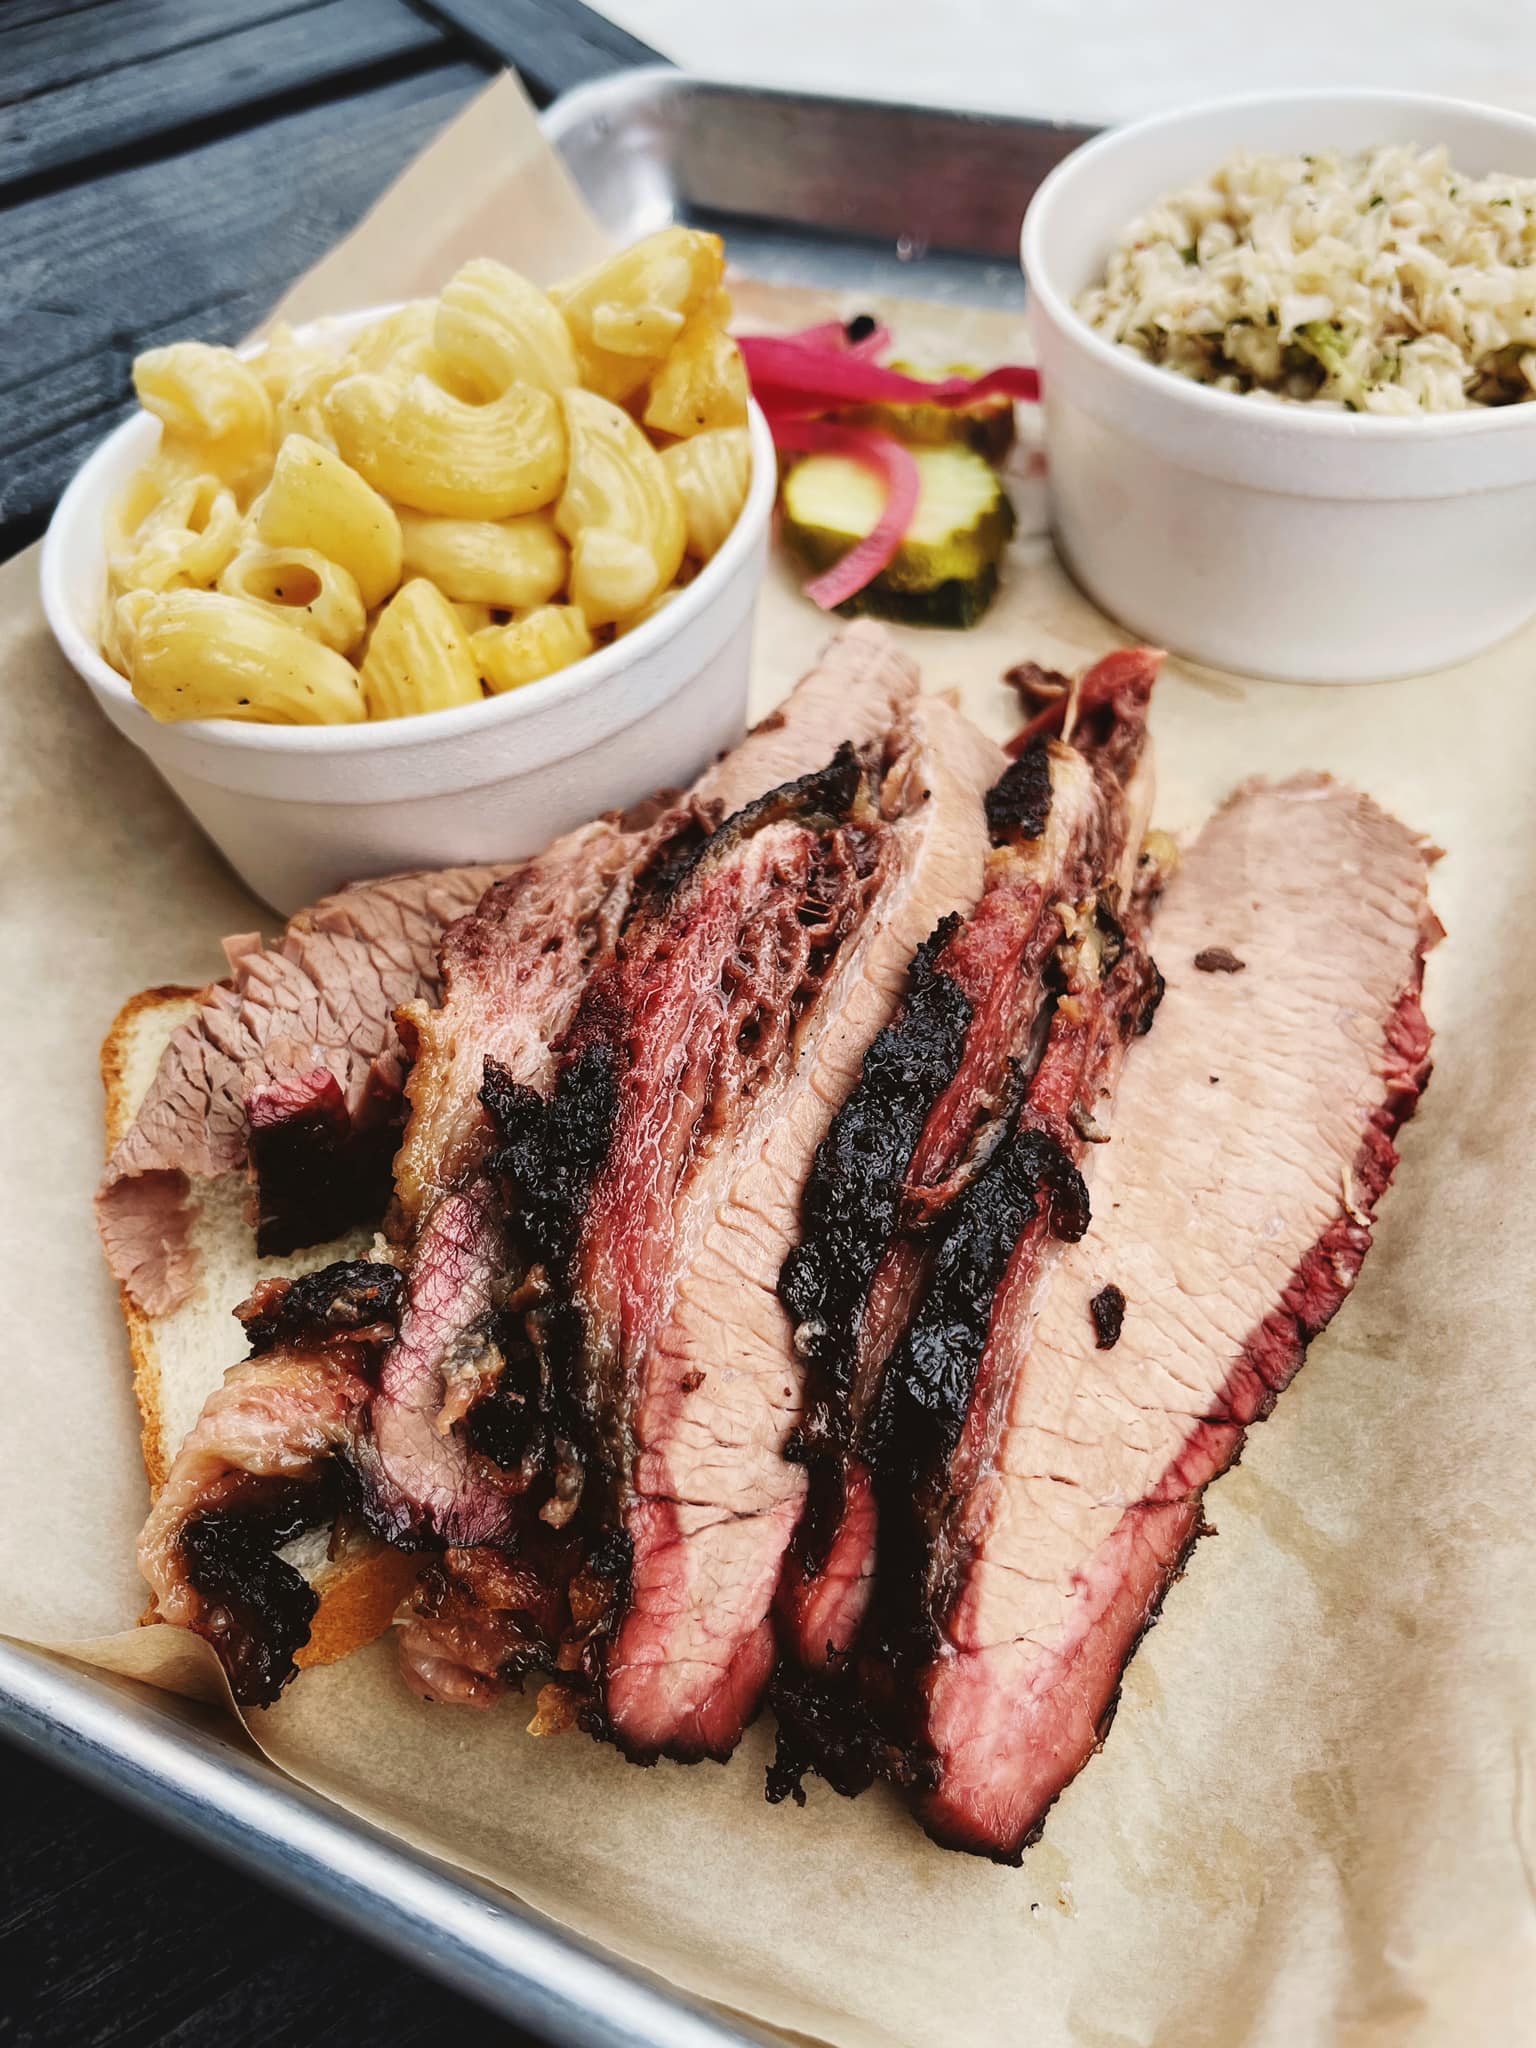 Slices of tender beef brisket paired with mac and cheese and coleslaw from Ford’s BBQ, now open in Tucker and Oakhurst-Decatur, Georgia. 